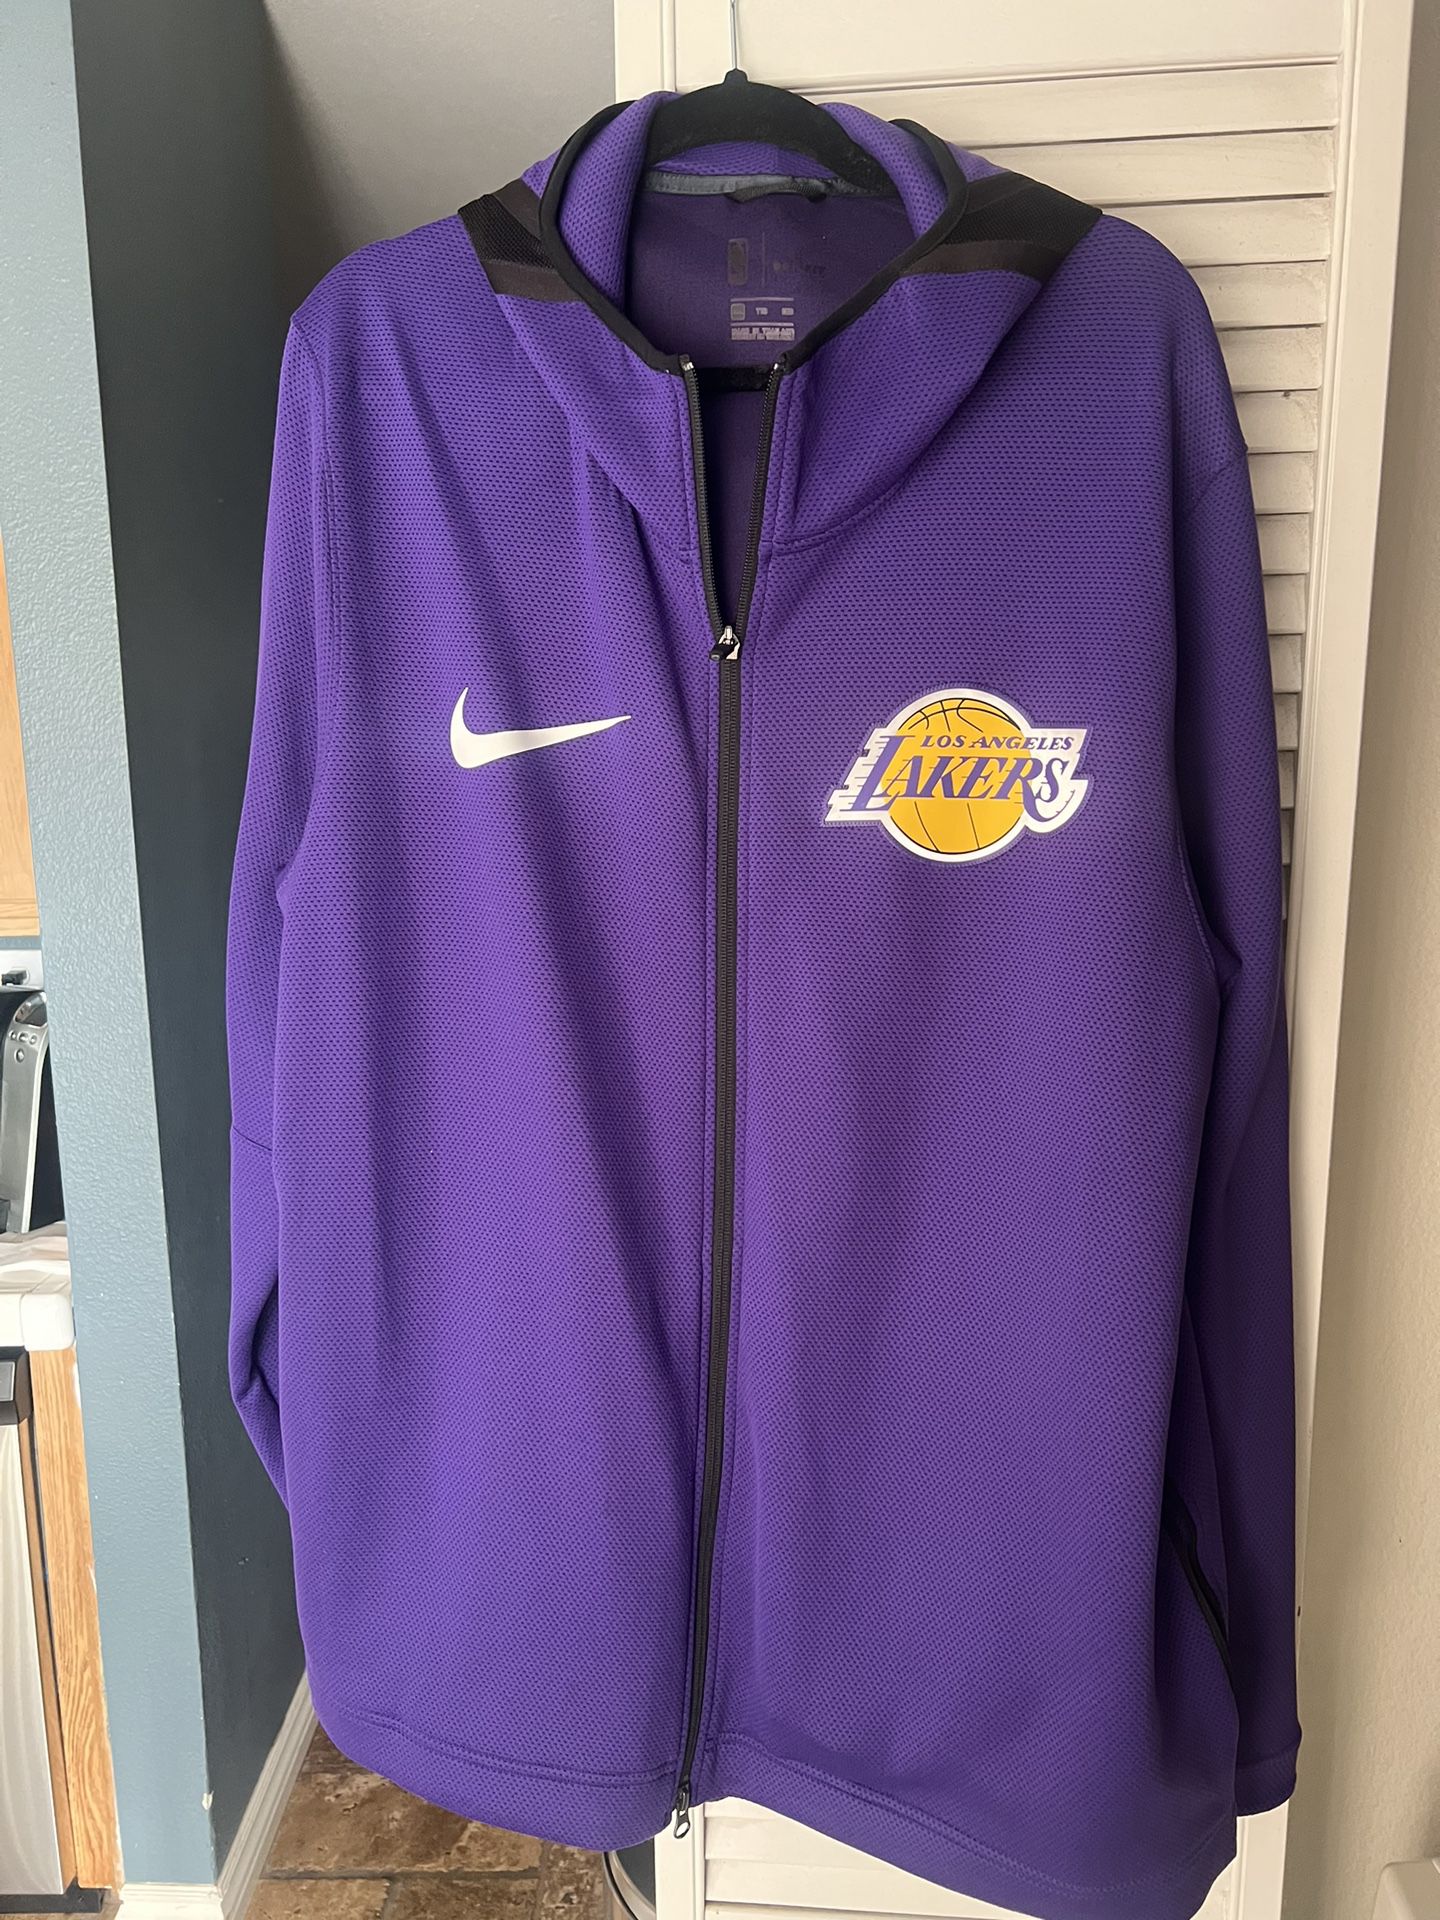 Nike Lakers Showtime Hoodie for Sale in Chino, CA - OfferUp